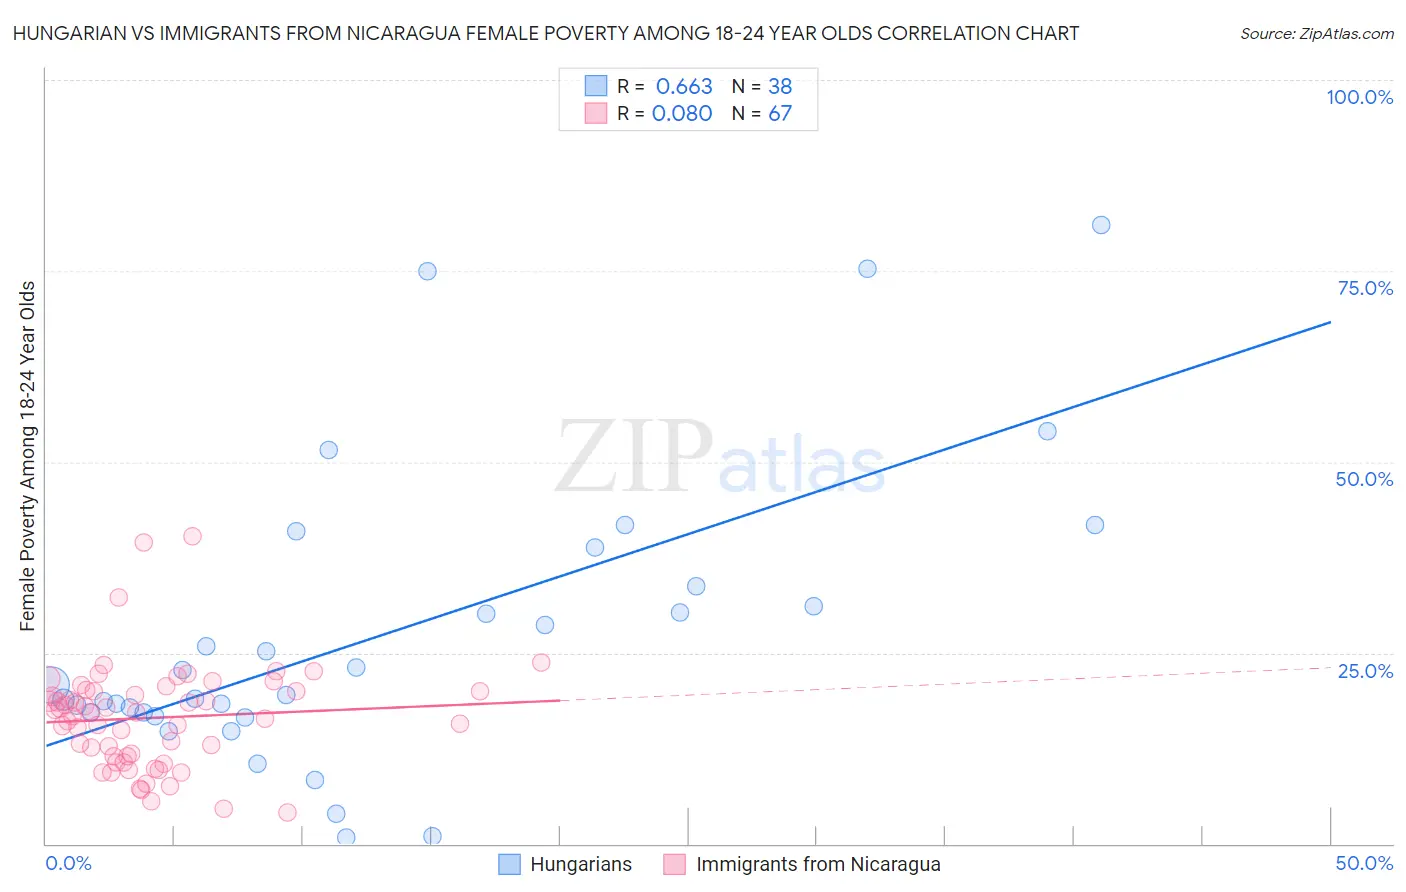 Hungarian vs Immigrants from Nicaragua Female Poverty Among 18-24 Year Olds